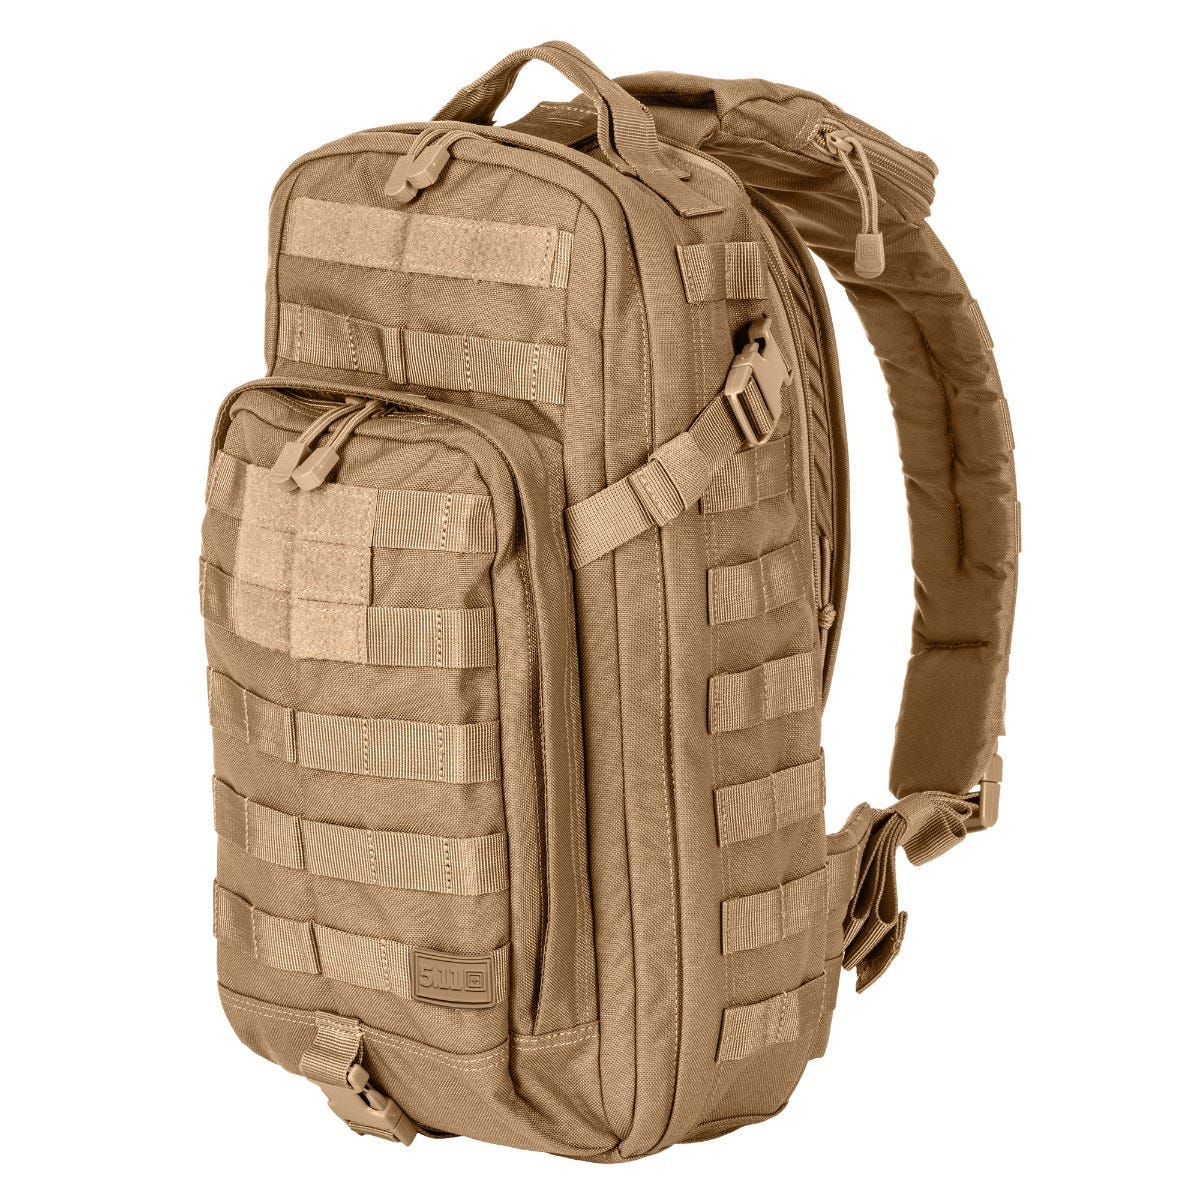 Rush 72 Sandstone New With Tags Details about   5.11 Tactical Rush 72 Backpack 